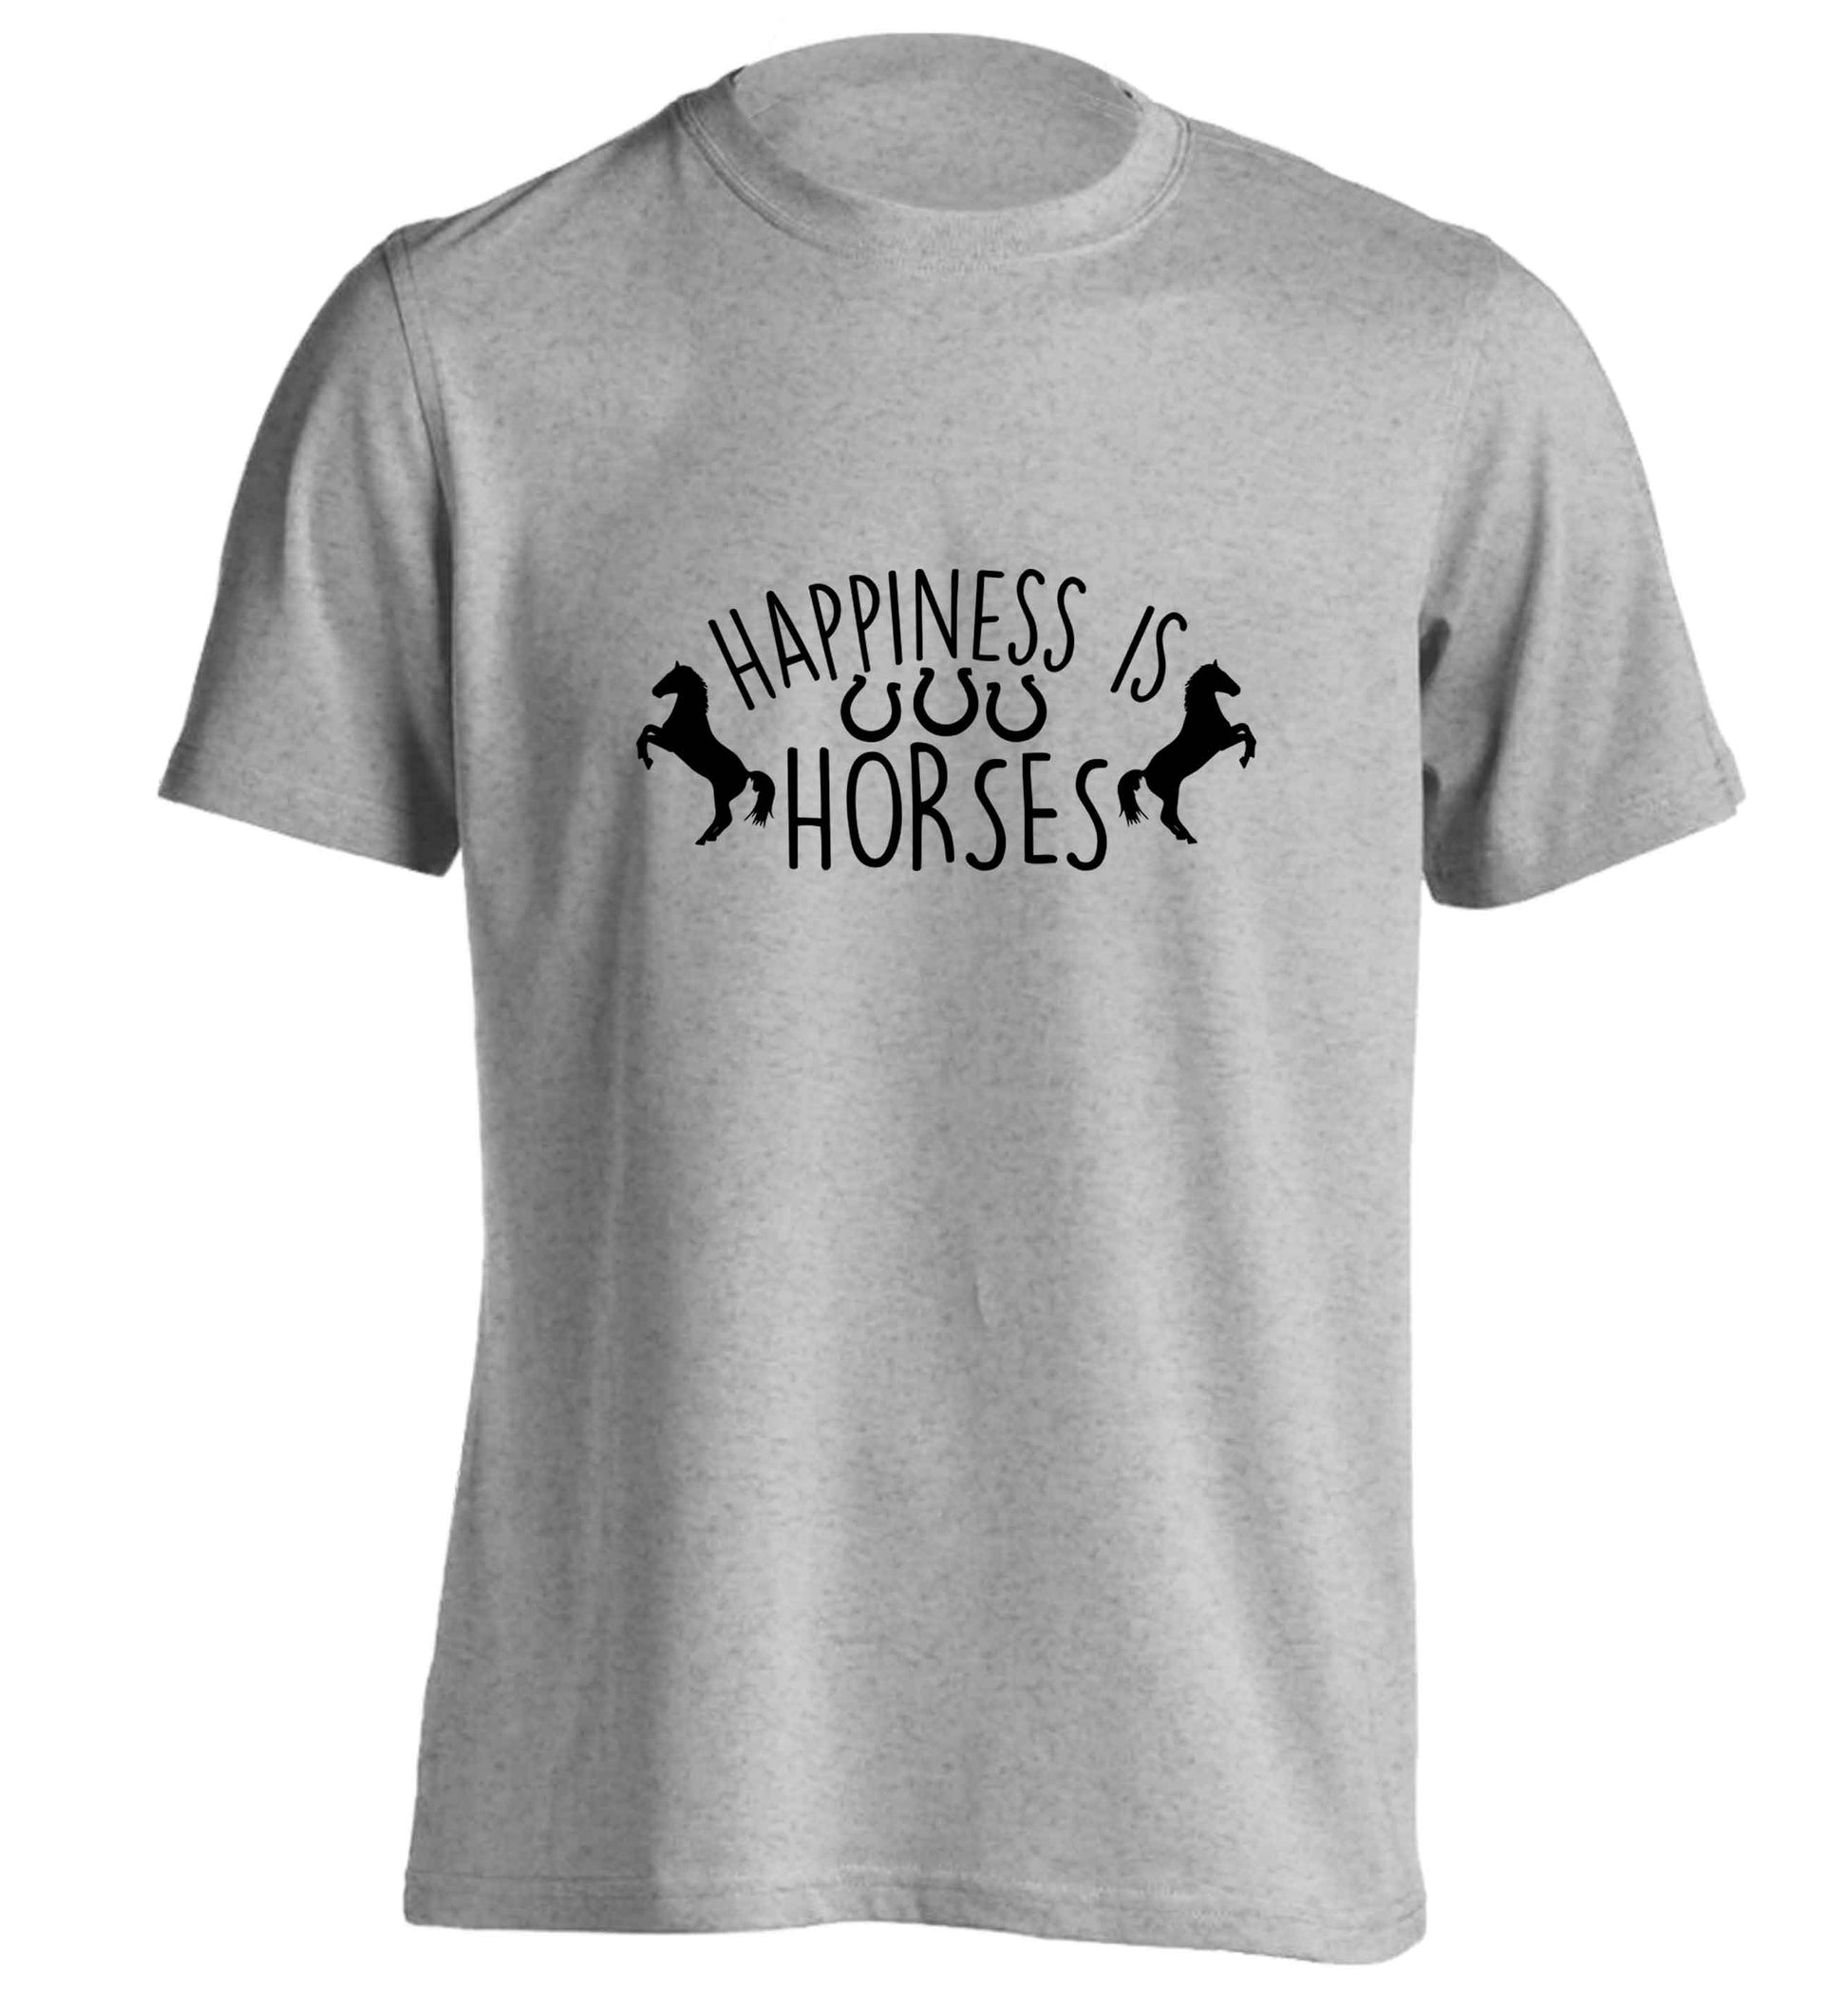 Happiness is horses adults unisex grey Tshirt 2XL